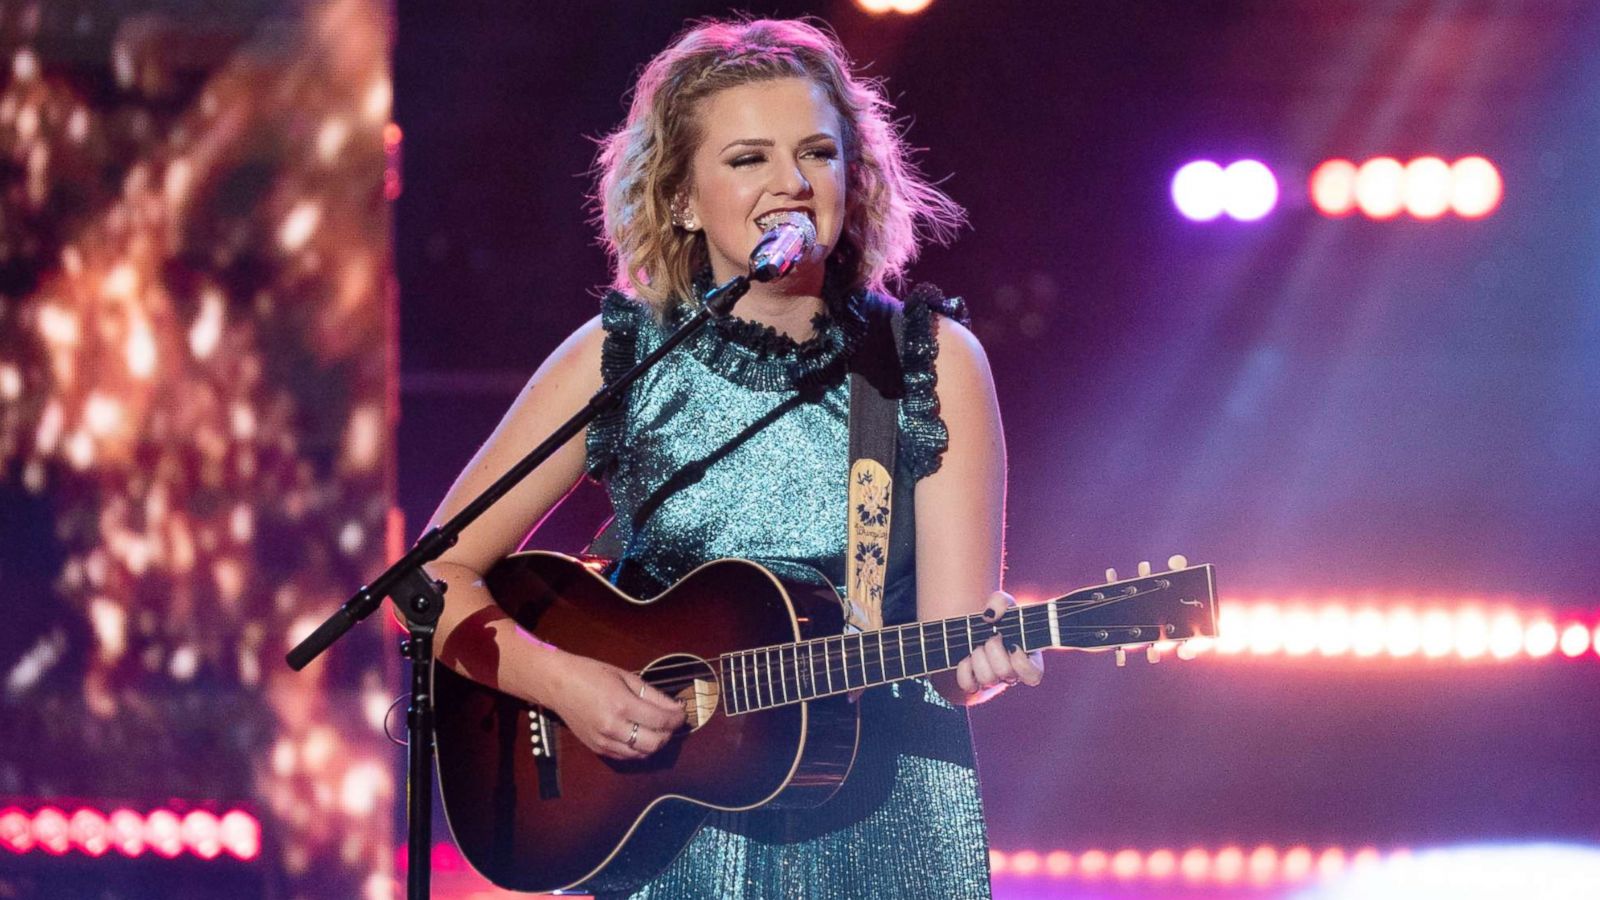 PHOTO: Maddie Poppe performs during the "American Idol" grand finale.